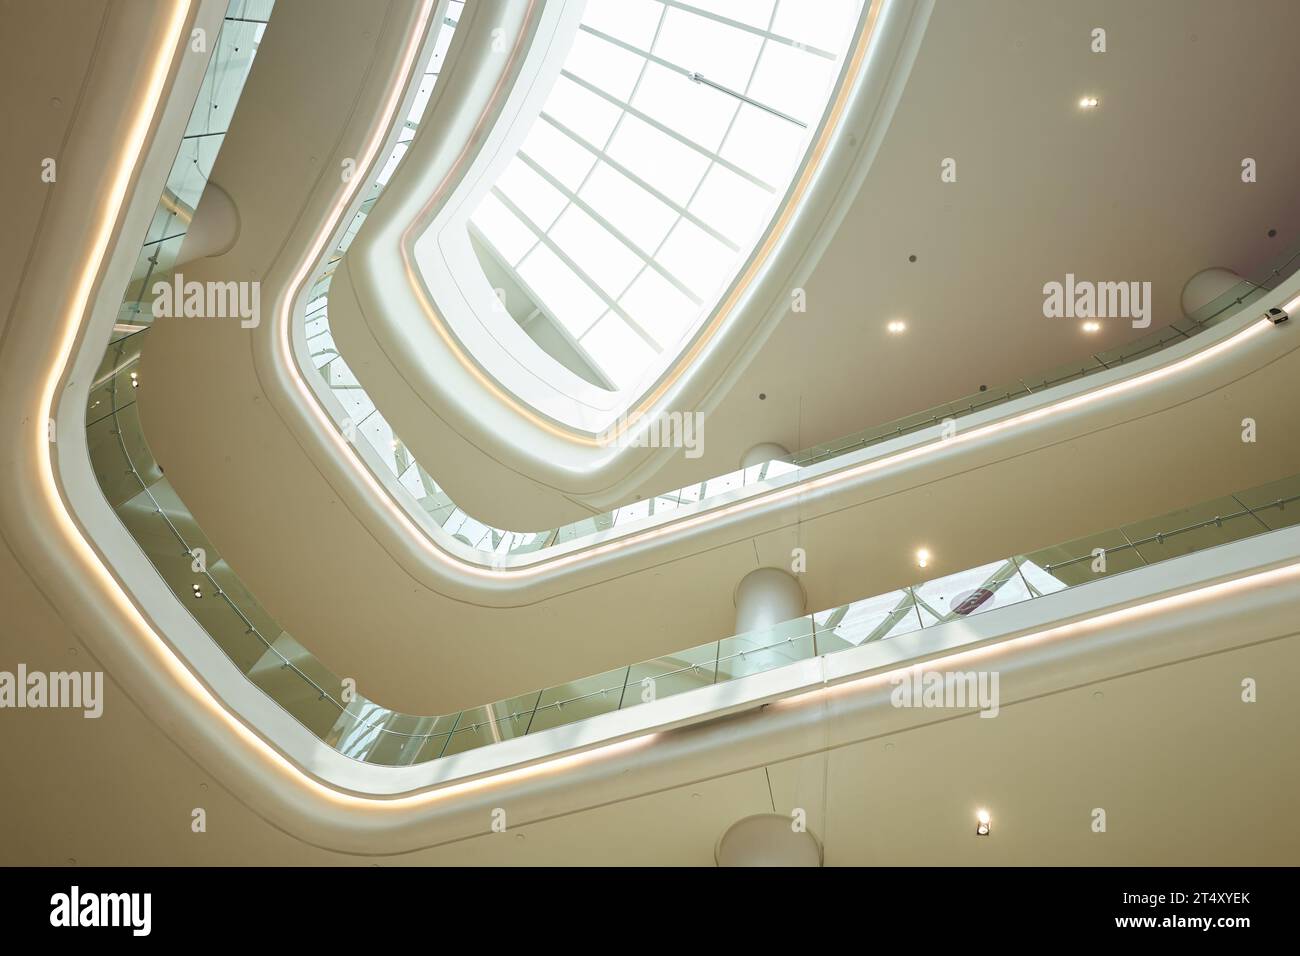 Low angle view of Architectural details with futuristic ceiling with lighting Stock Photo